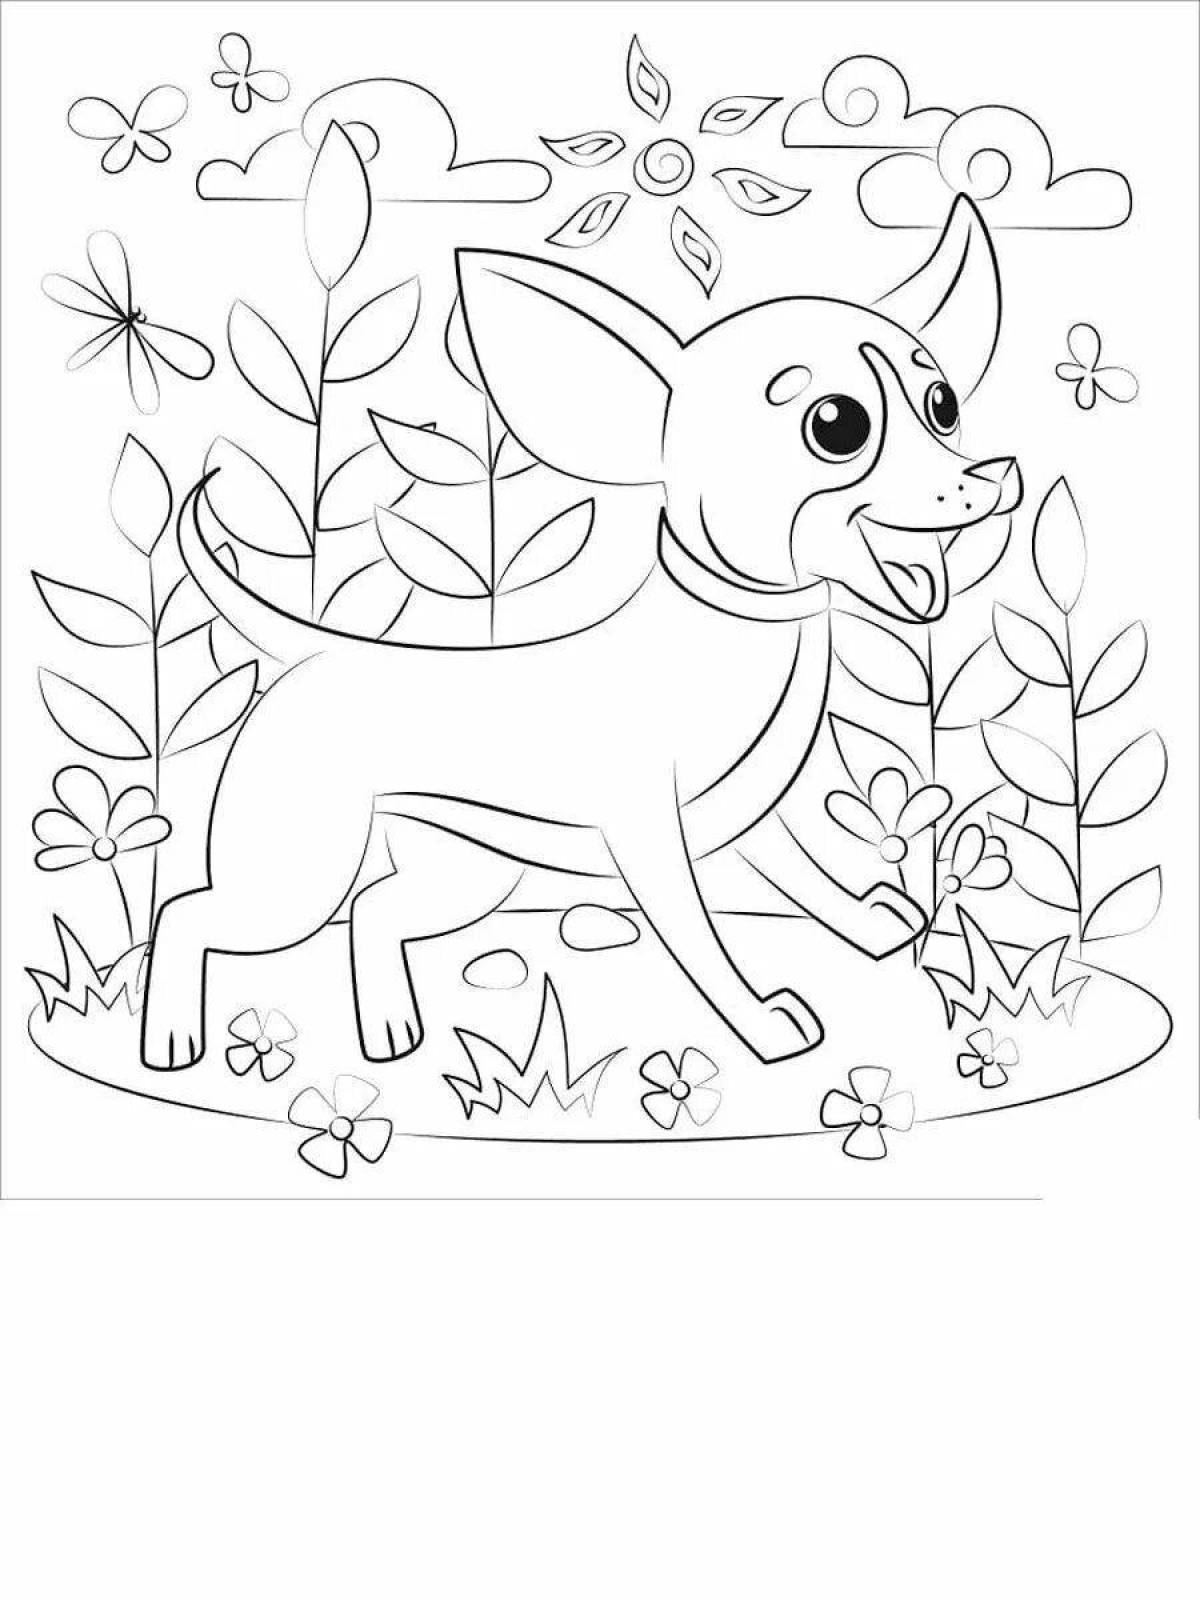 Outstanding chihuahua coloring page for kids